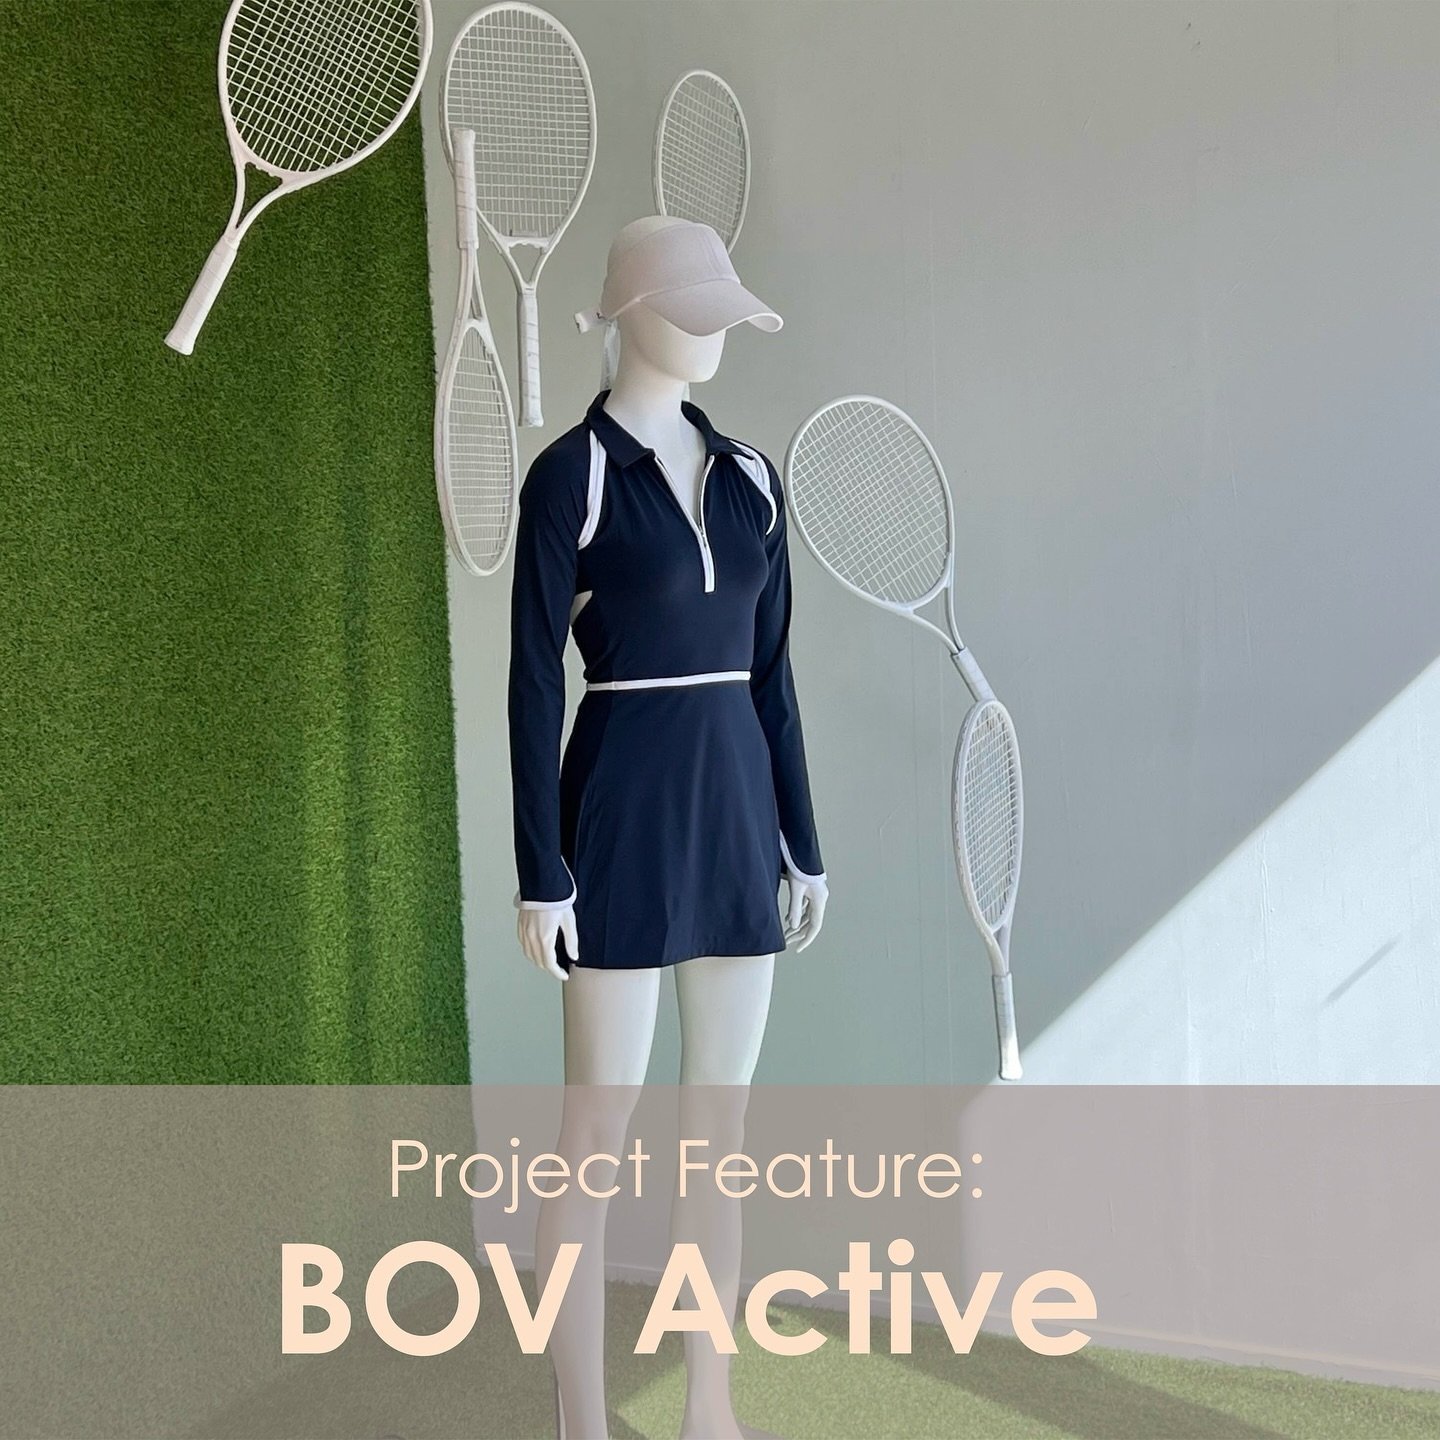 We&rsquo;re thrilled to have teamed up with @stacktmarket to provide visual merchandising support for their STACKT Xccelerator Program winners! ⛳️

Our first collaboration with Bov Active, a Toronto-based golf athleisure brand, included a virtual con